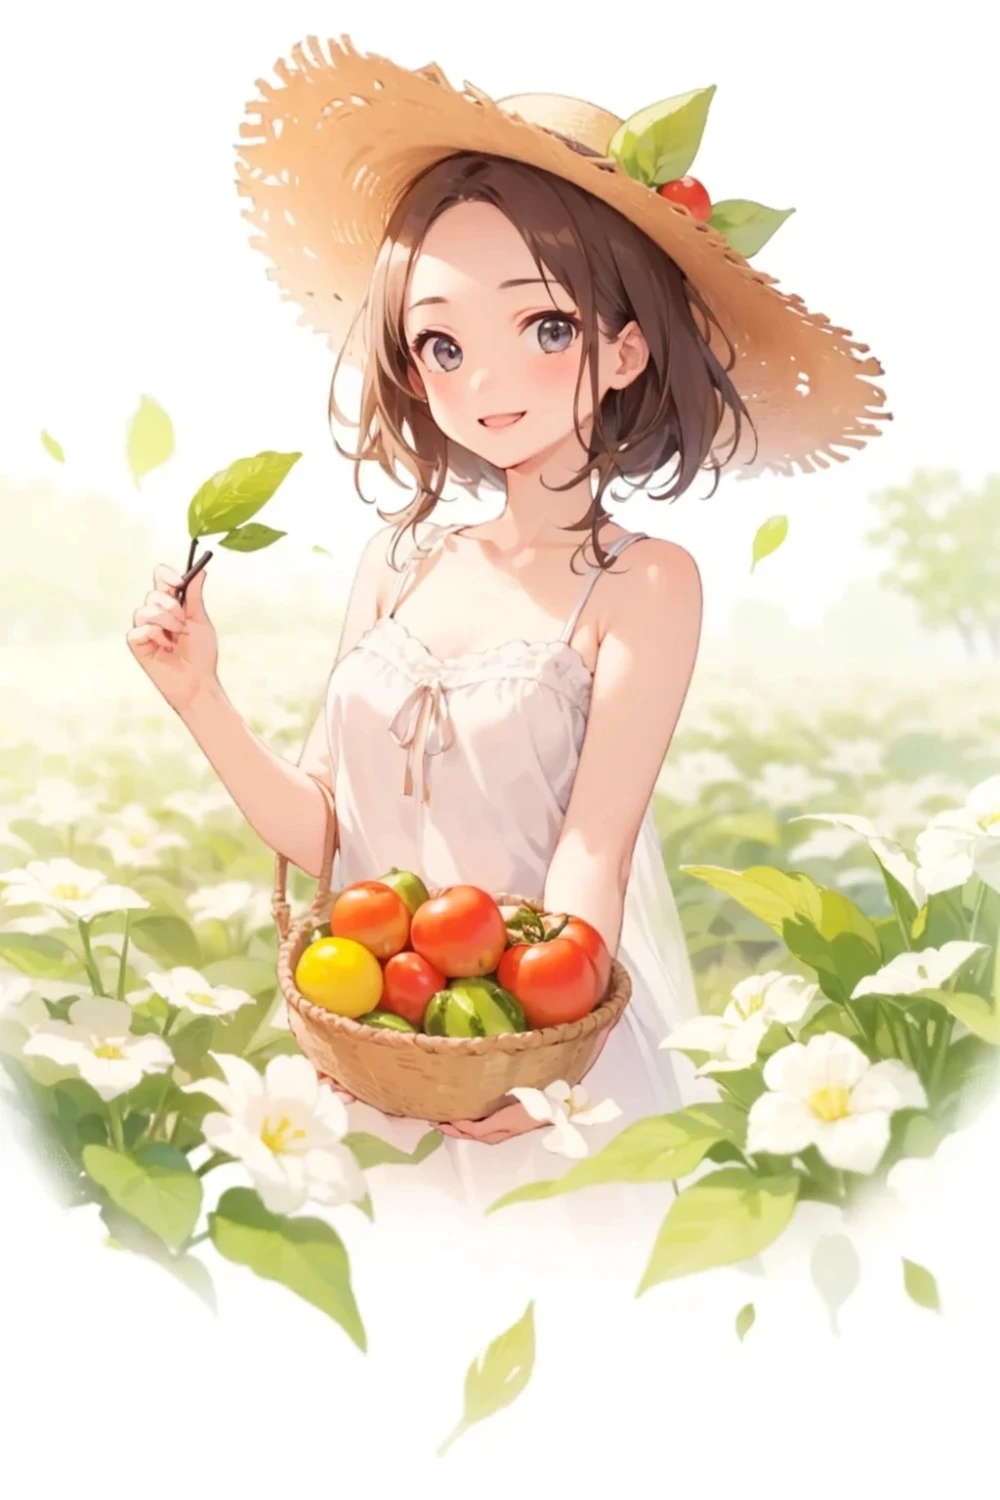 straw-hat -anime-style-all-ages-48